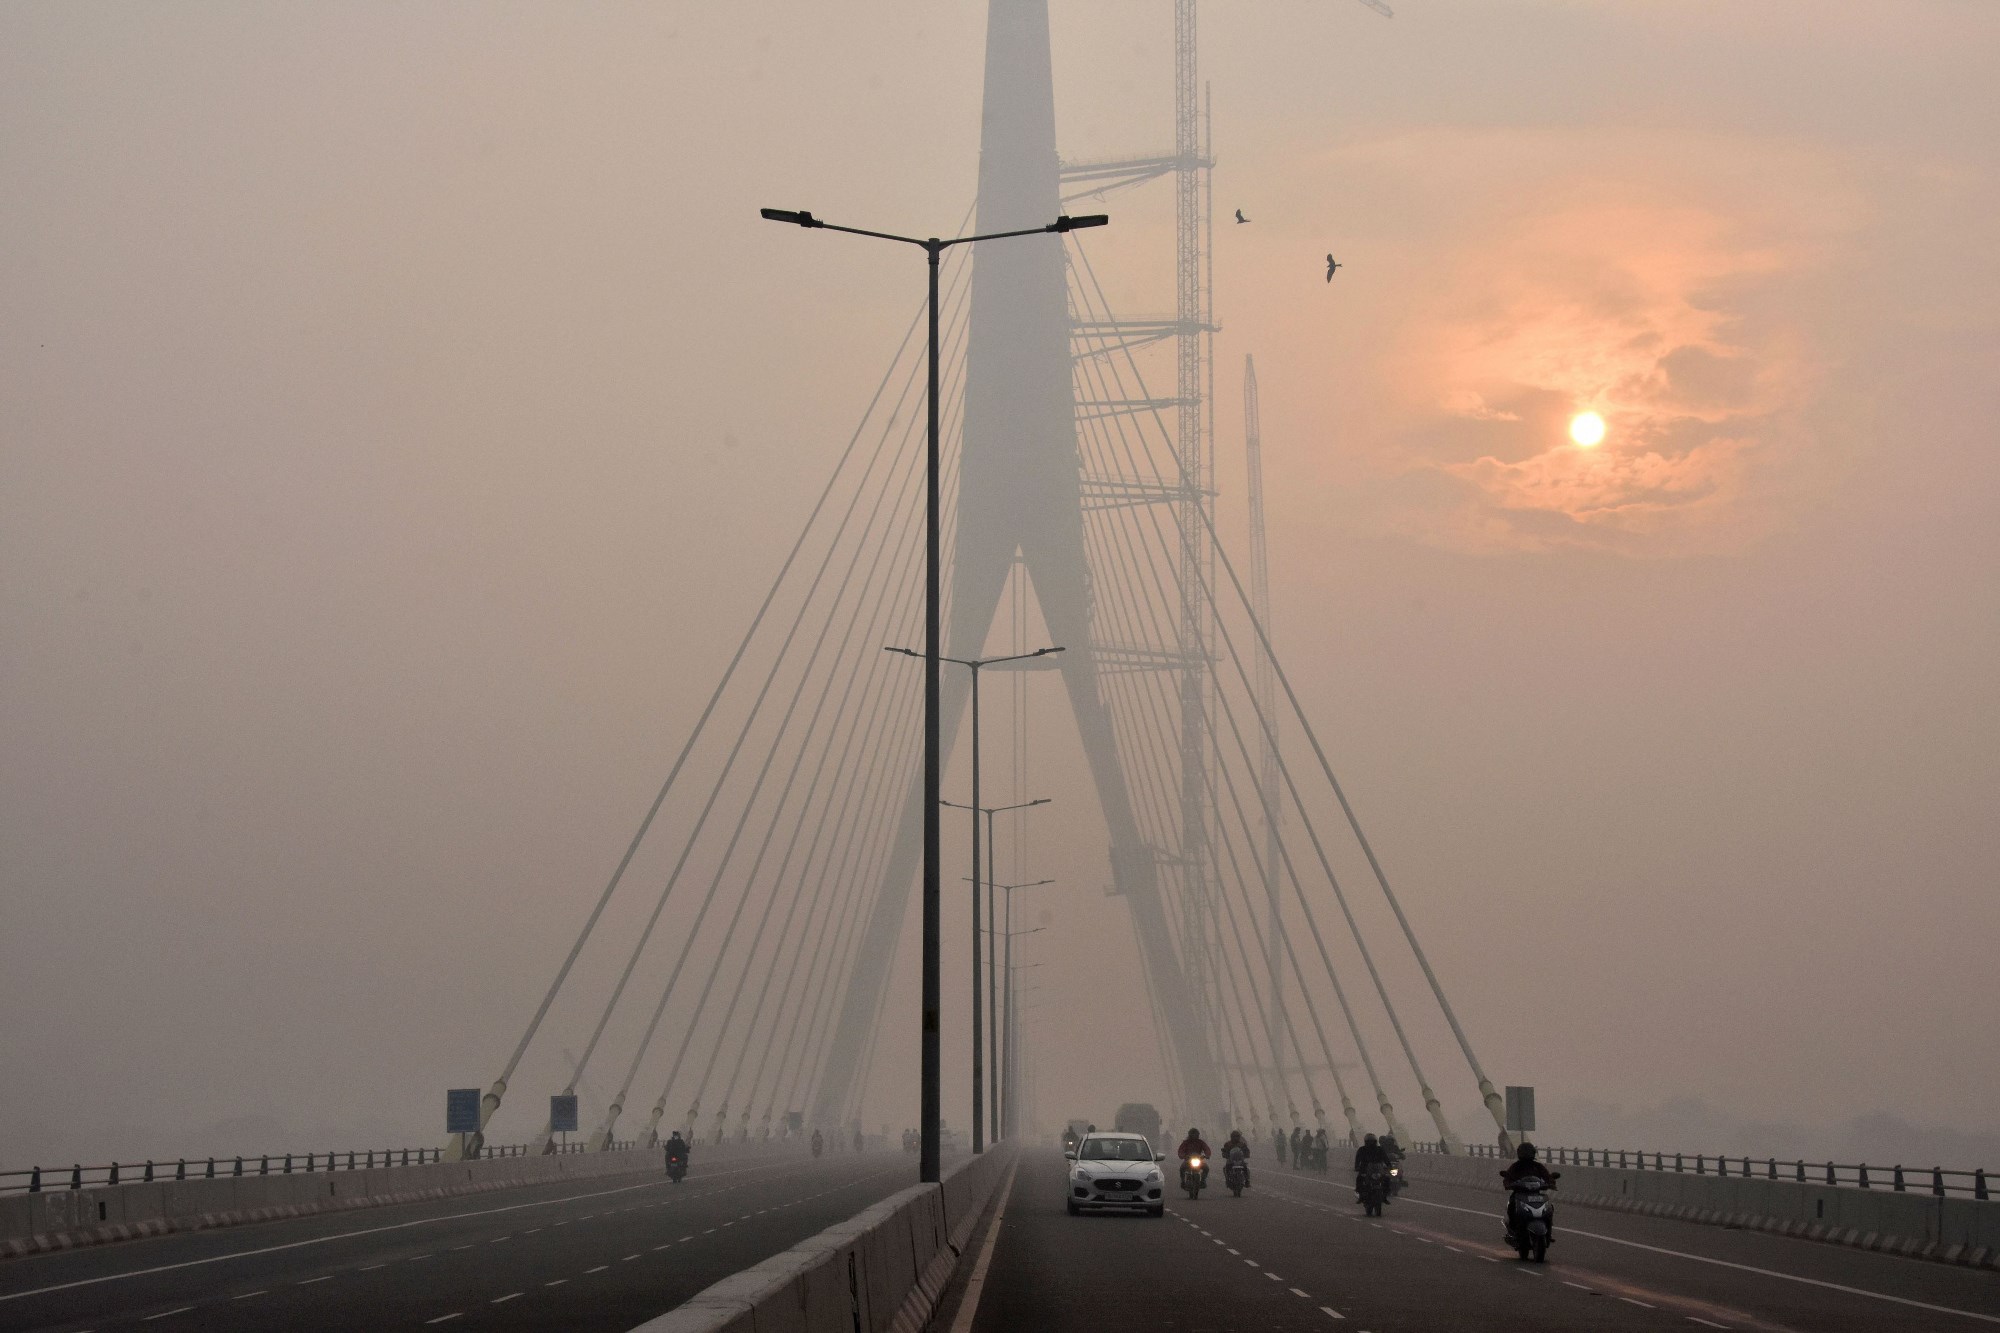 New Delhi: The sun is vaguely seen behind the Signature Bridge amid heavy smog, in New Delhi, Friday, Nov. 15, 2019. A thick layer of toxic smog engulfed Delhi as the pollution level continued to remain in the 'severe' category for the fourth consecutive day. (PTI Photo)